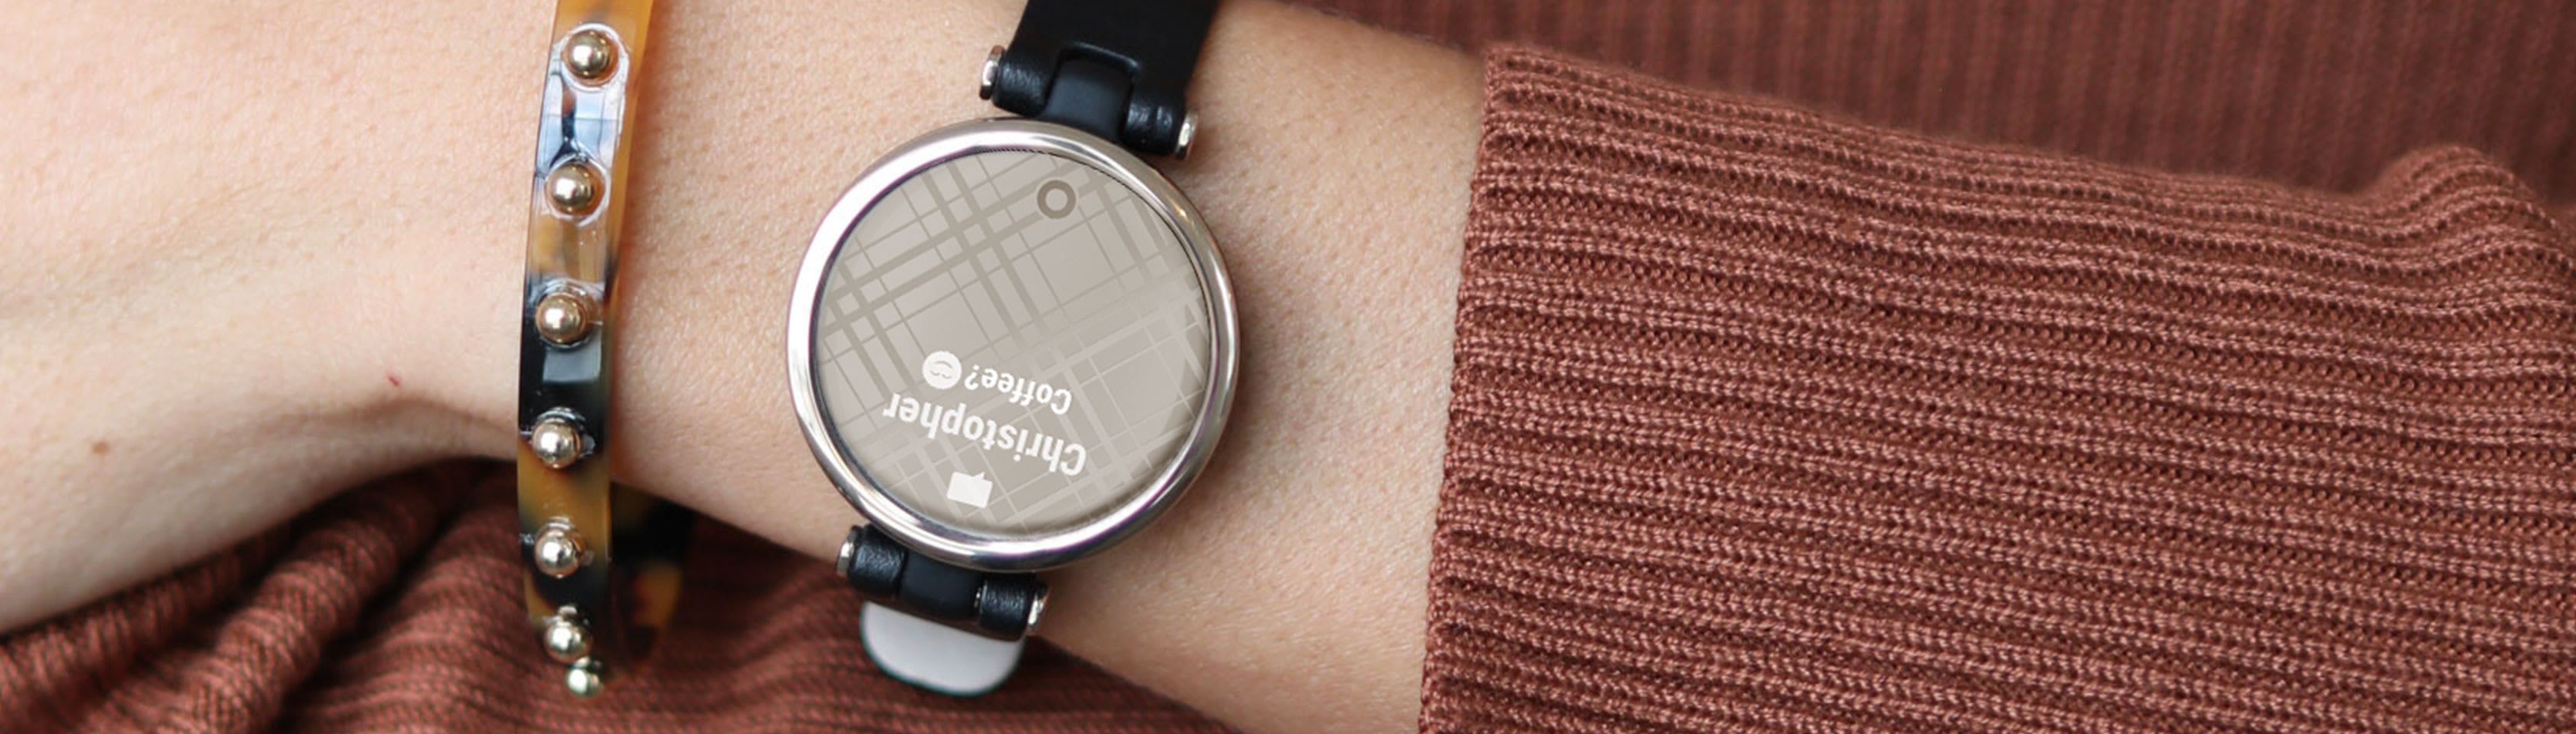 Garmin debuts its stylish Lily smartwatch designed for women